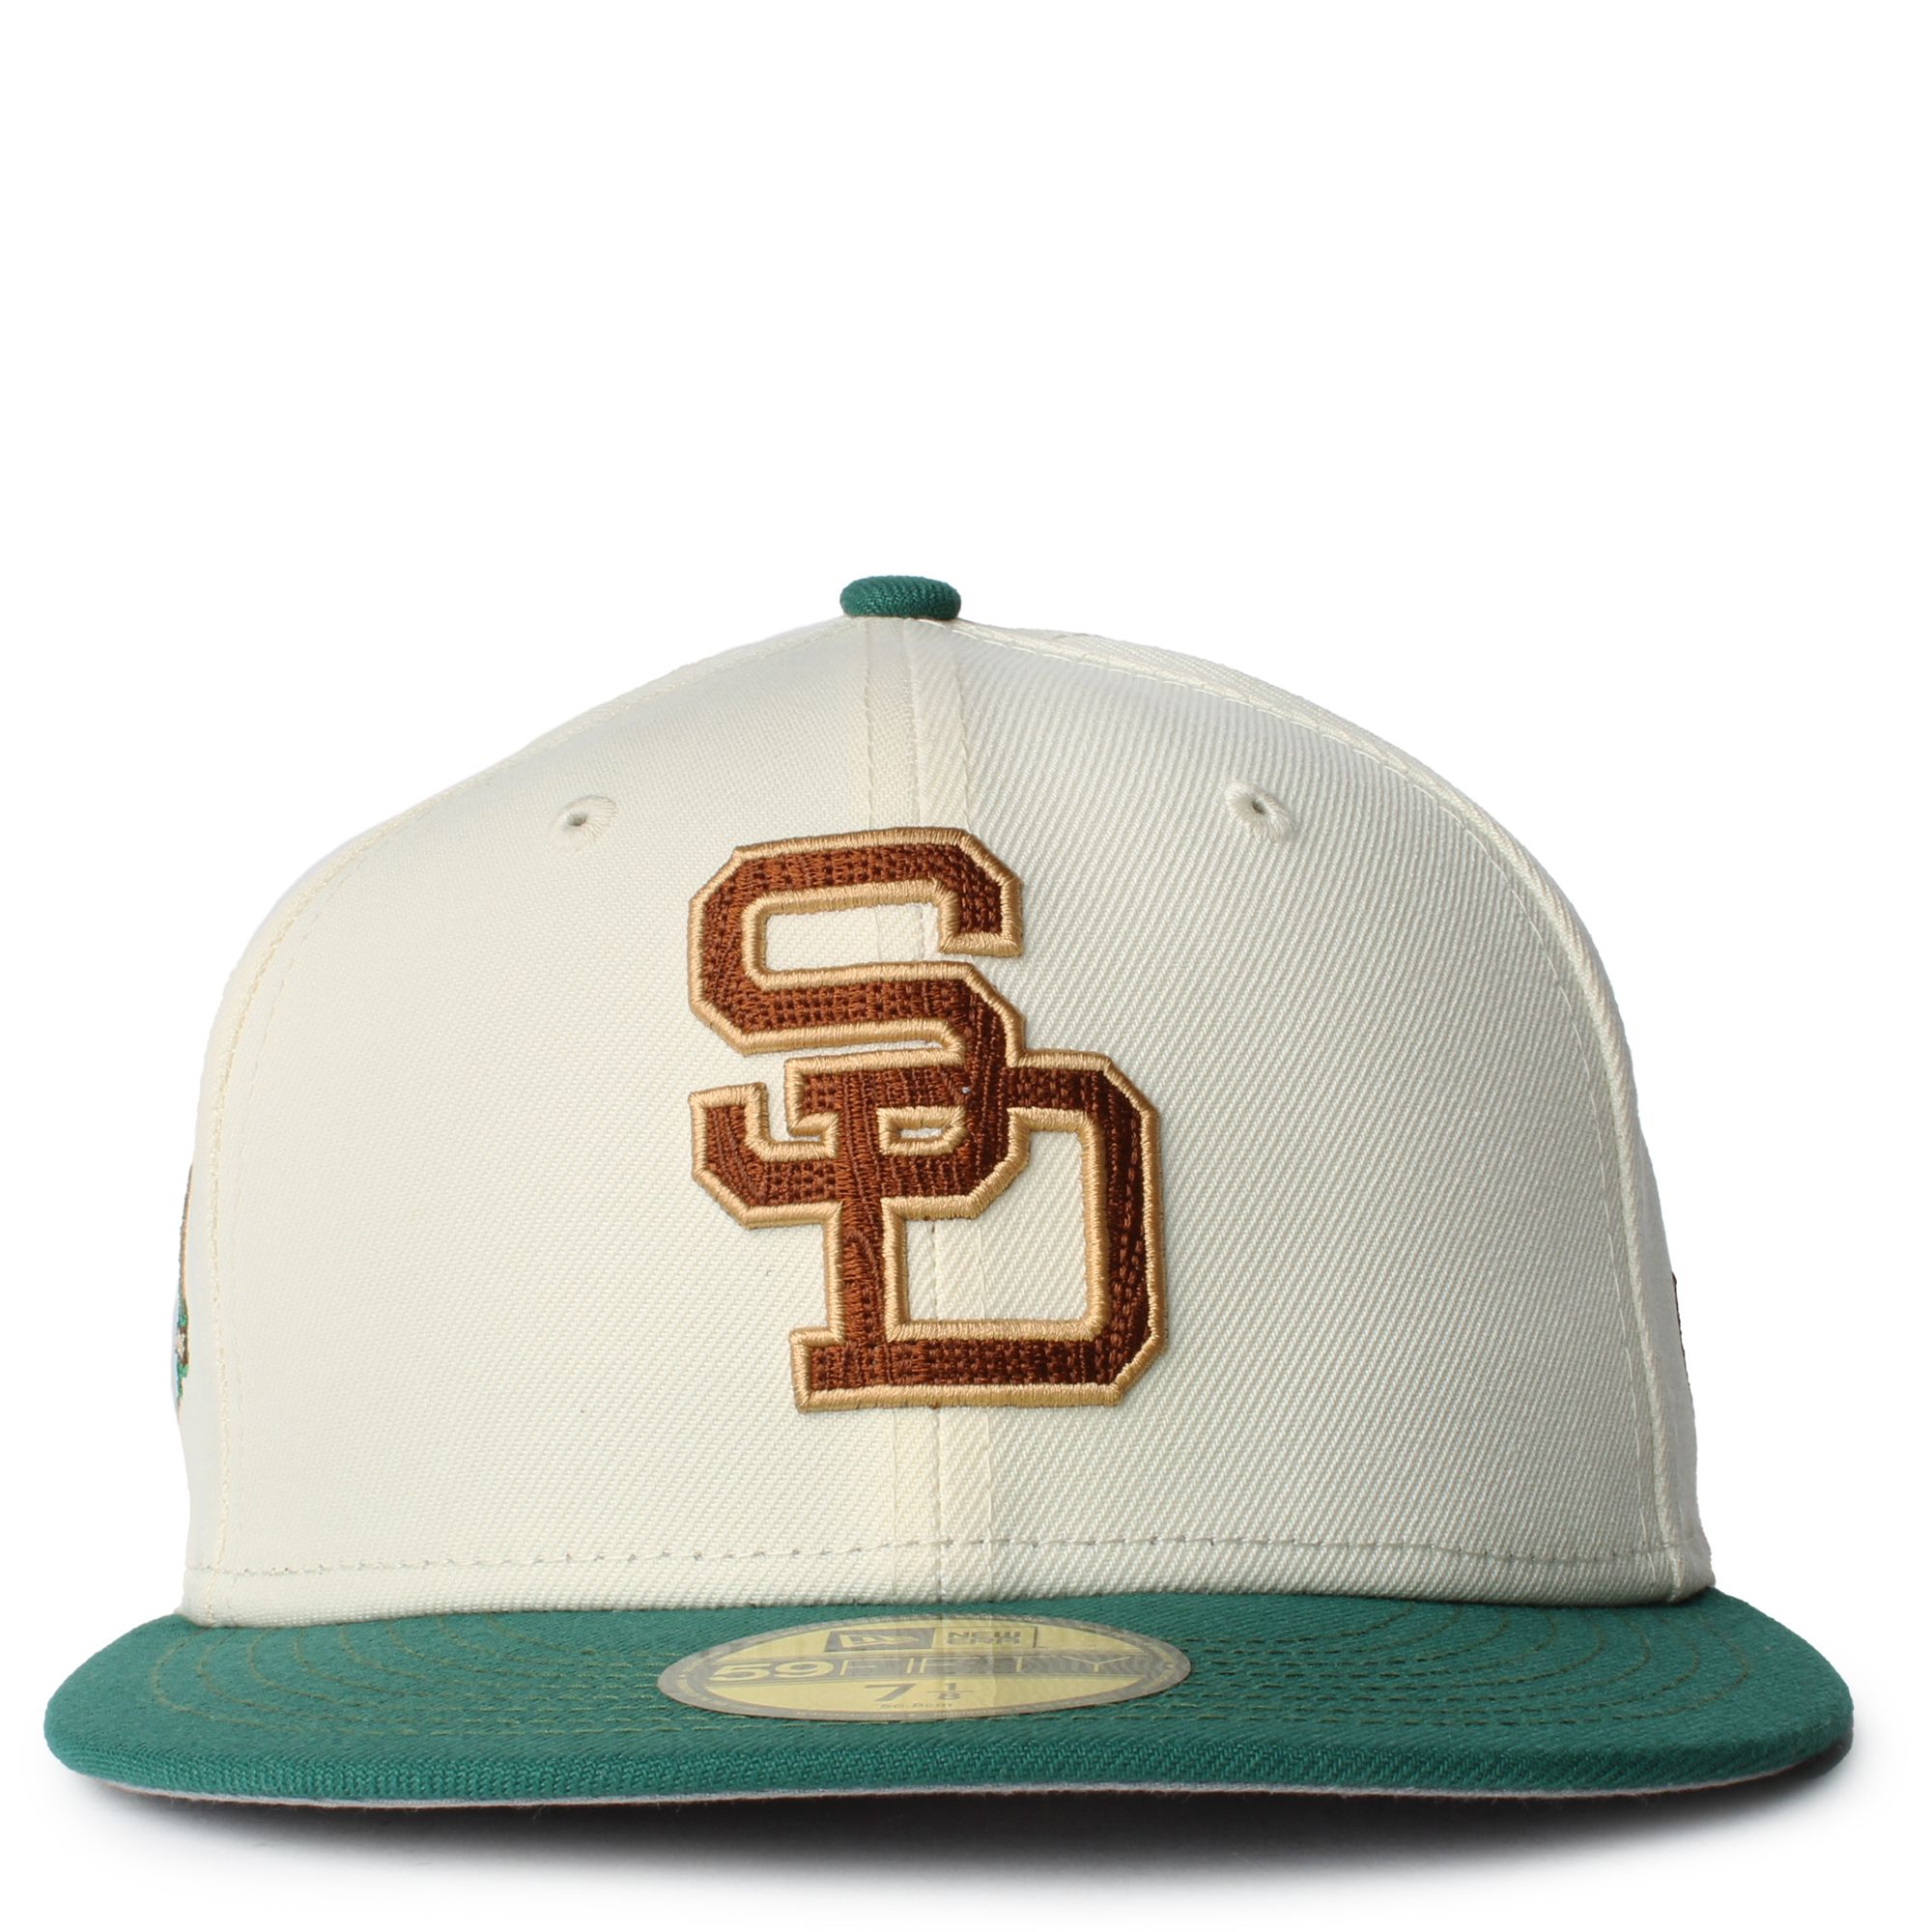 San Diego Padres Retro Patch 59FIFTY Fitted Hat - Cream/ Brown 23 C/BRN / 7 1/8